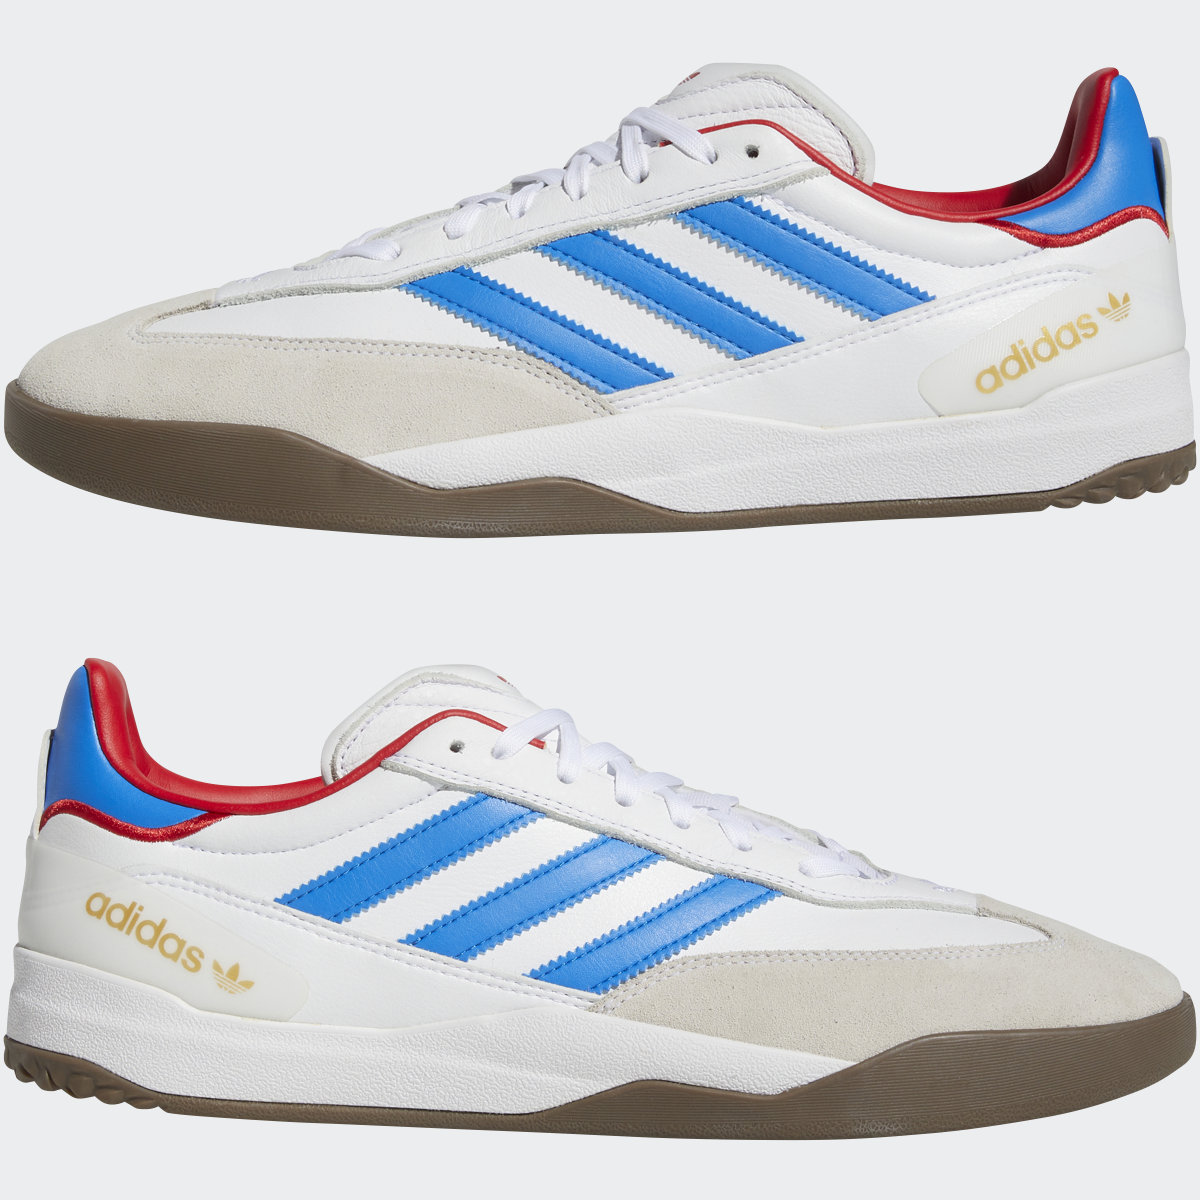 Adidas Copa Nationale Shoes. 10